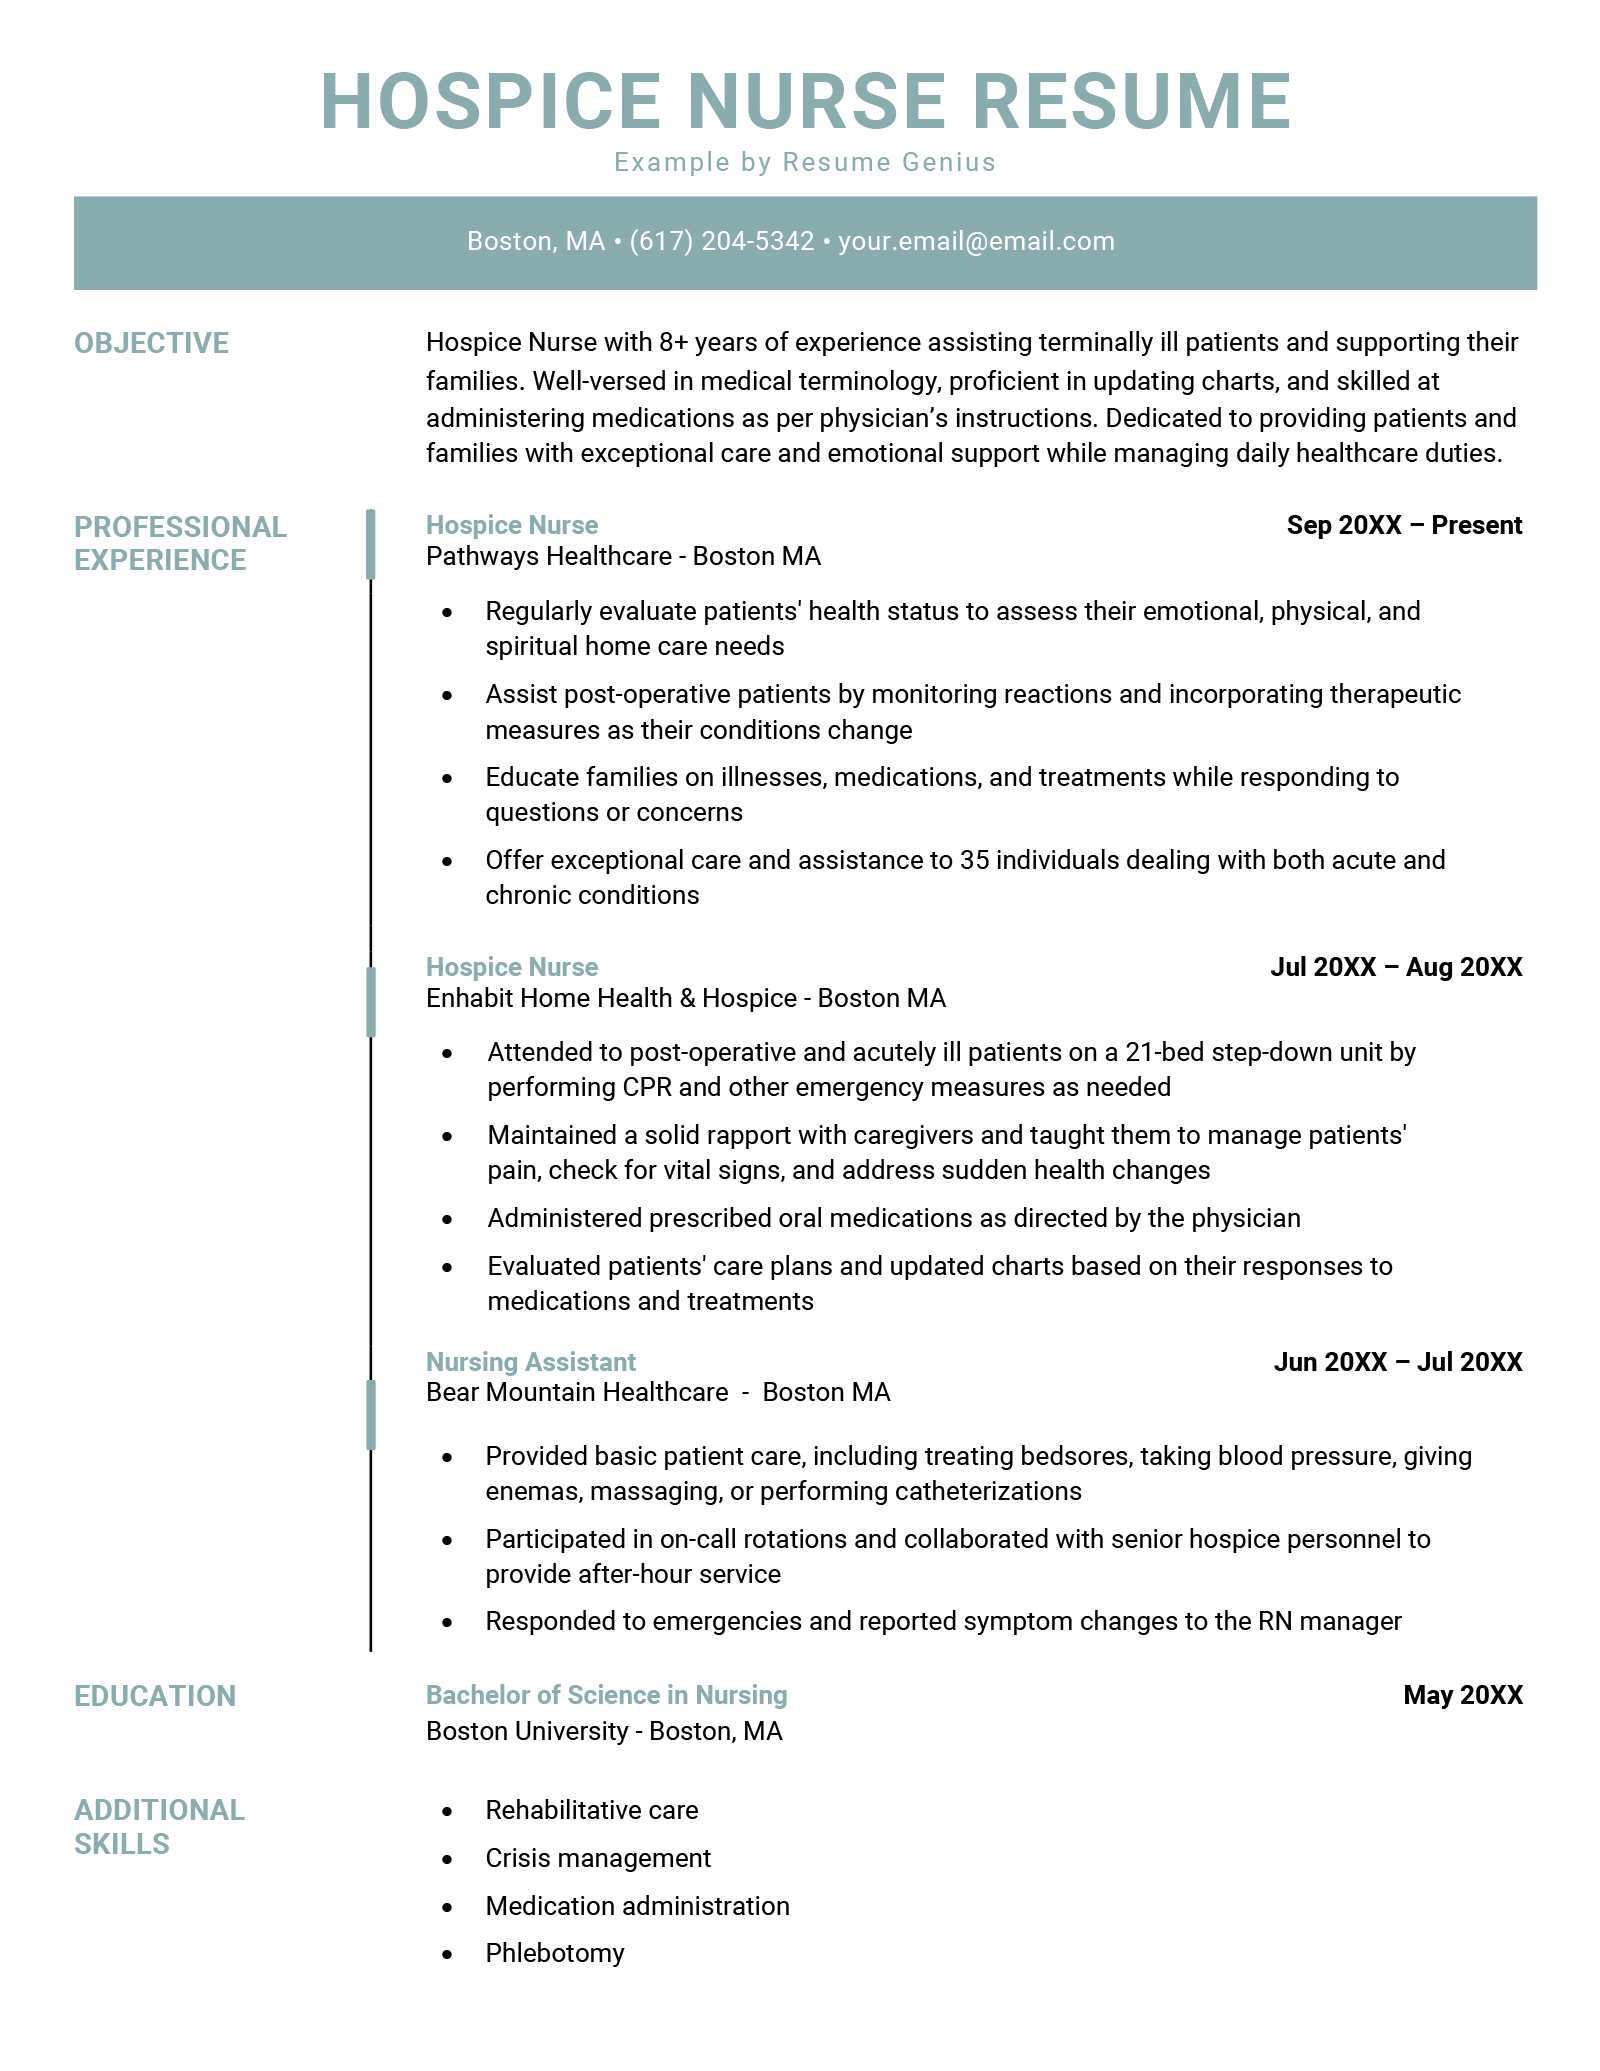 A resume sample for a hospice nurse with a sea green header and a timeline graphic to show the applicant's professional experience